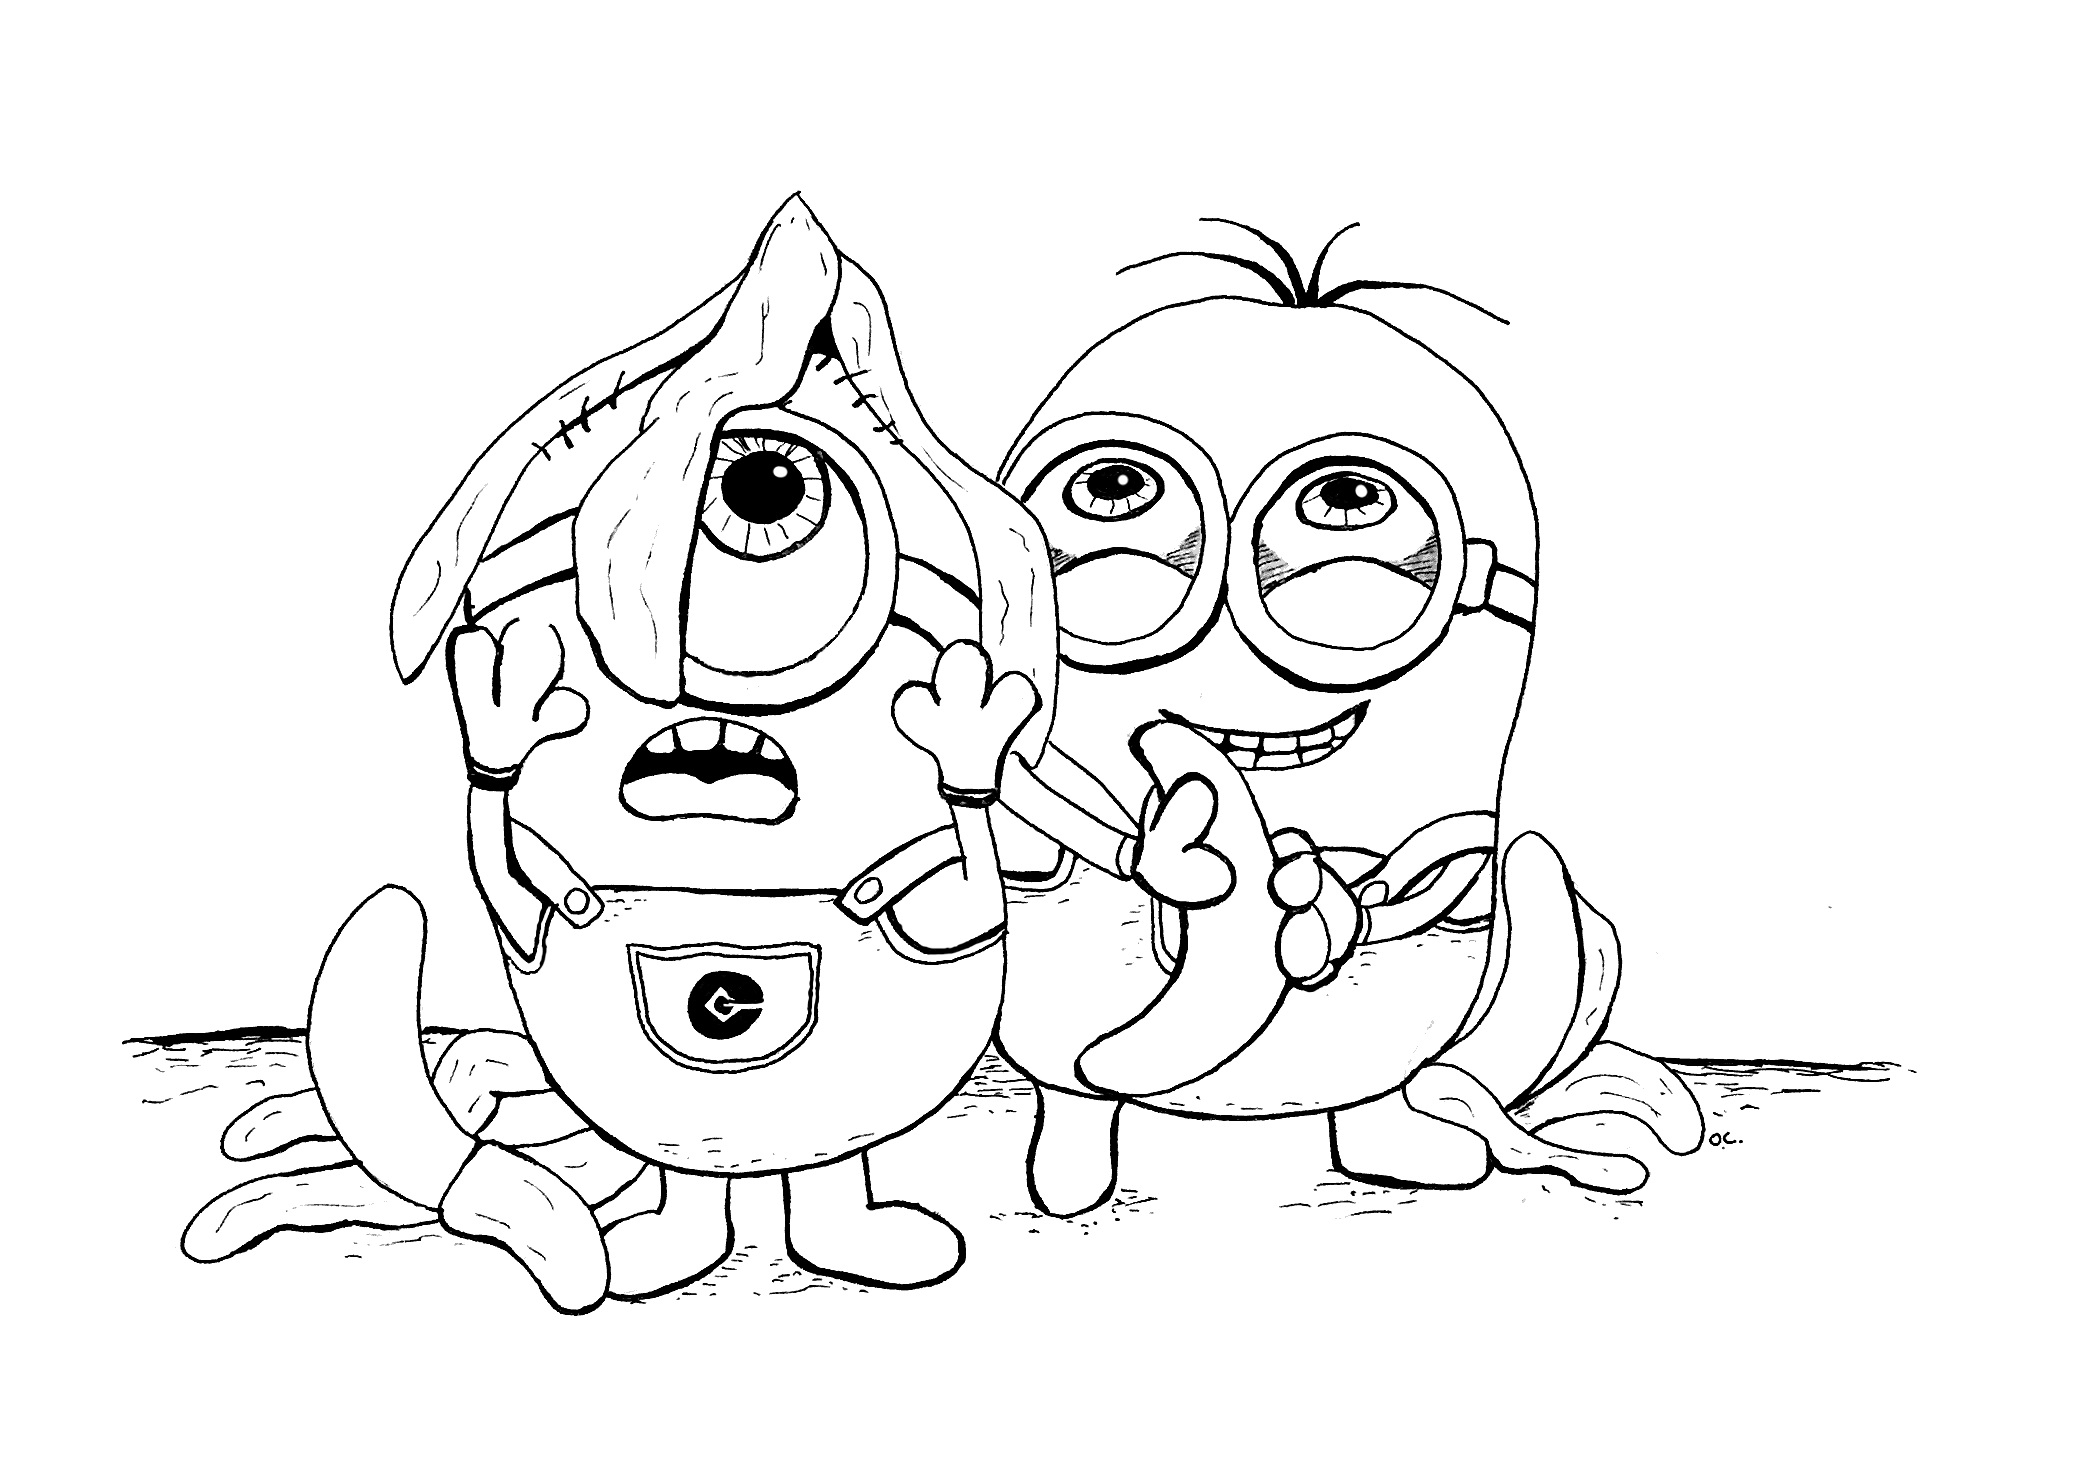 Despicable Coloring Pages Coloring Pages Coloring Book Pages Of The Minions From Despicable